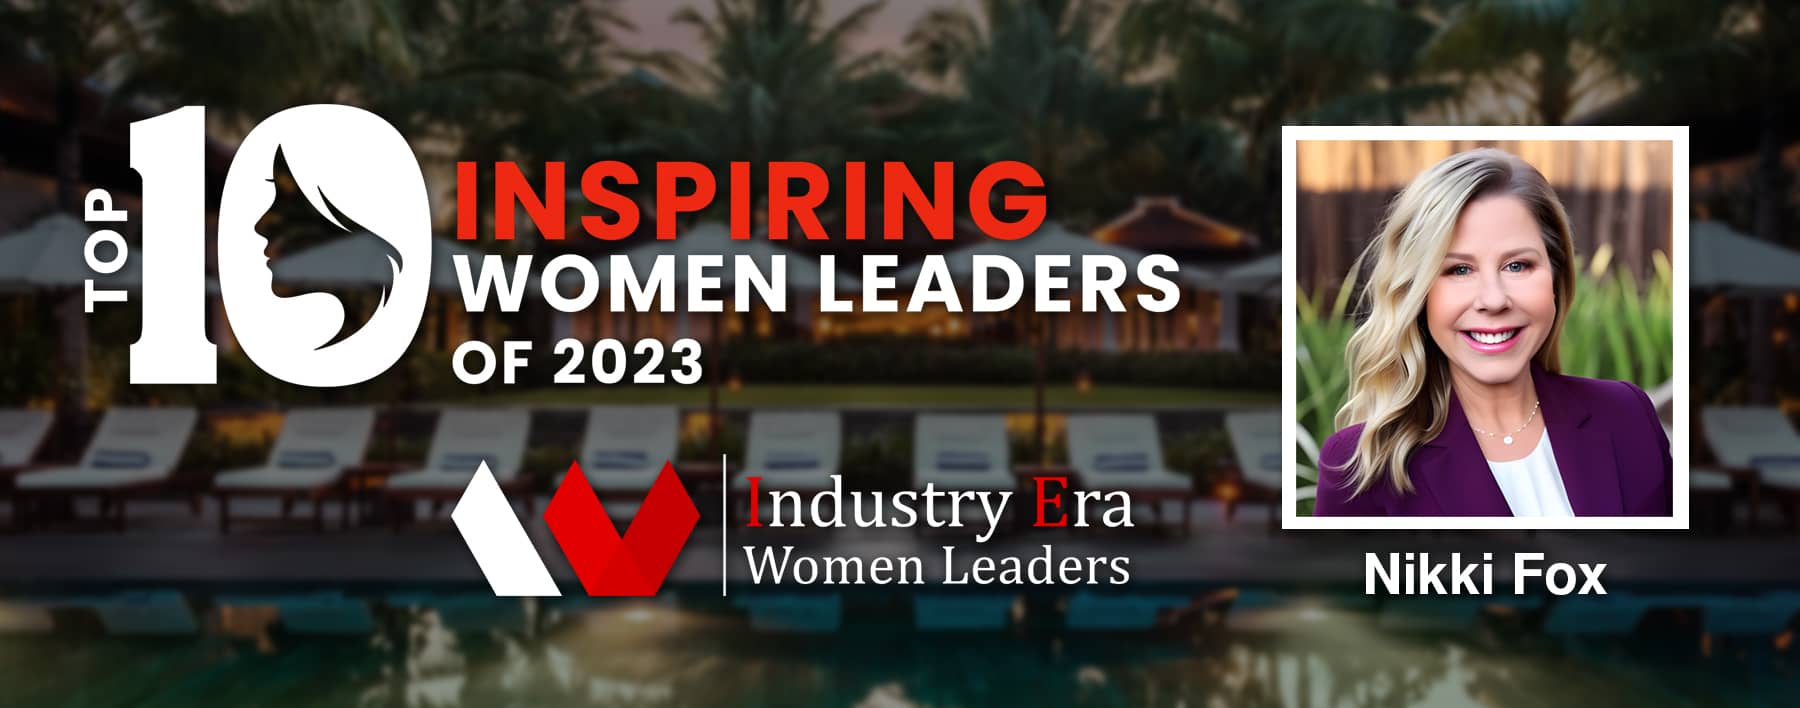 Nikki Fox Recognized as One of Top 10 Inspiring Women Leaders of 2023 | GLR, Inc.